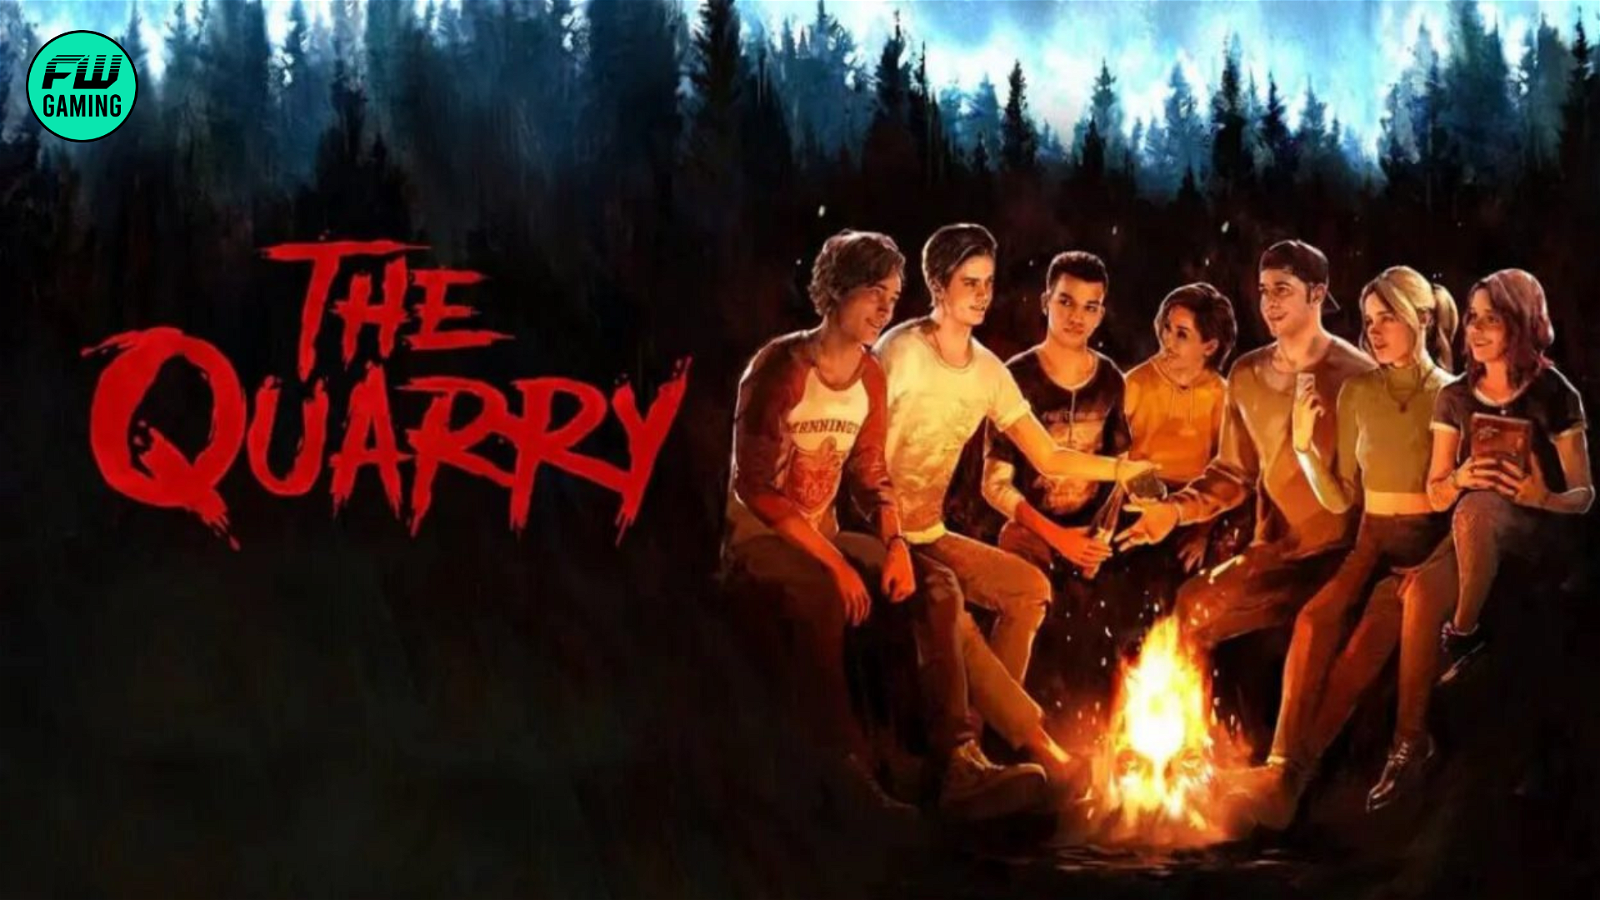 Why 'The Quarry' is the Best Video Game in its Genre